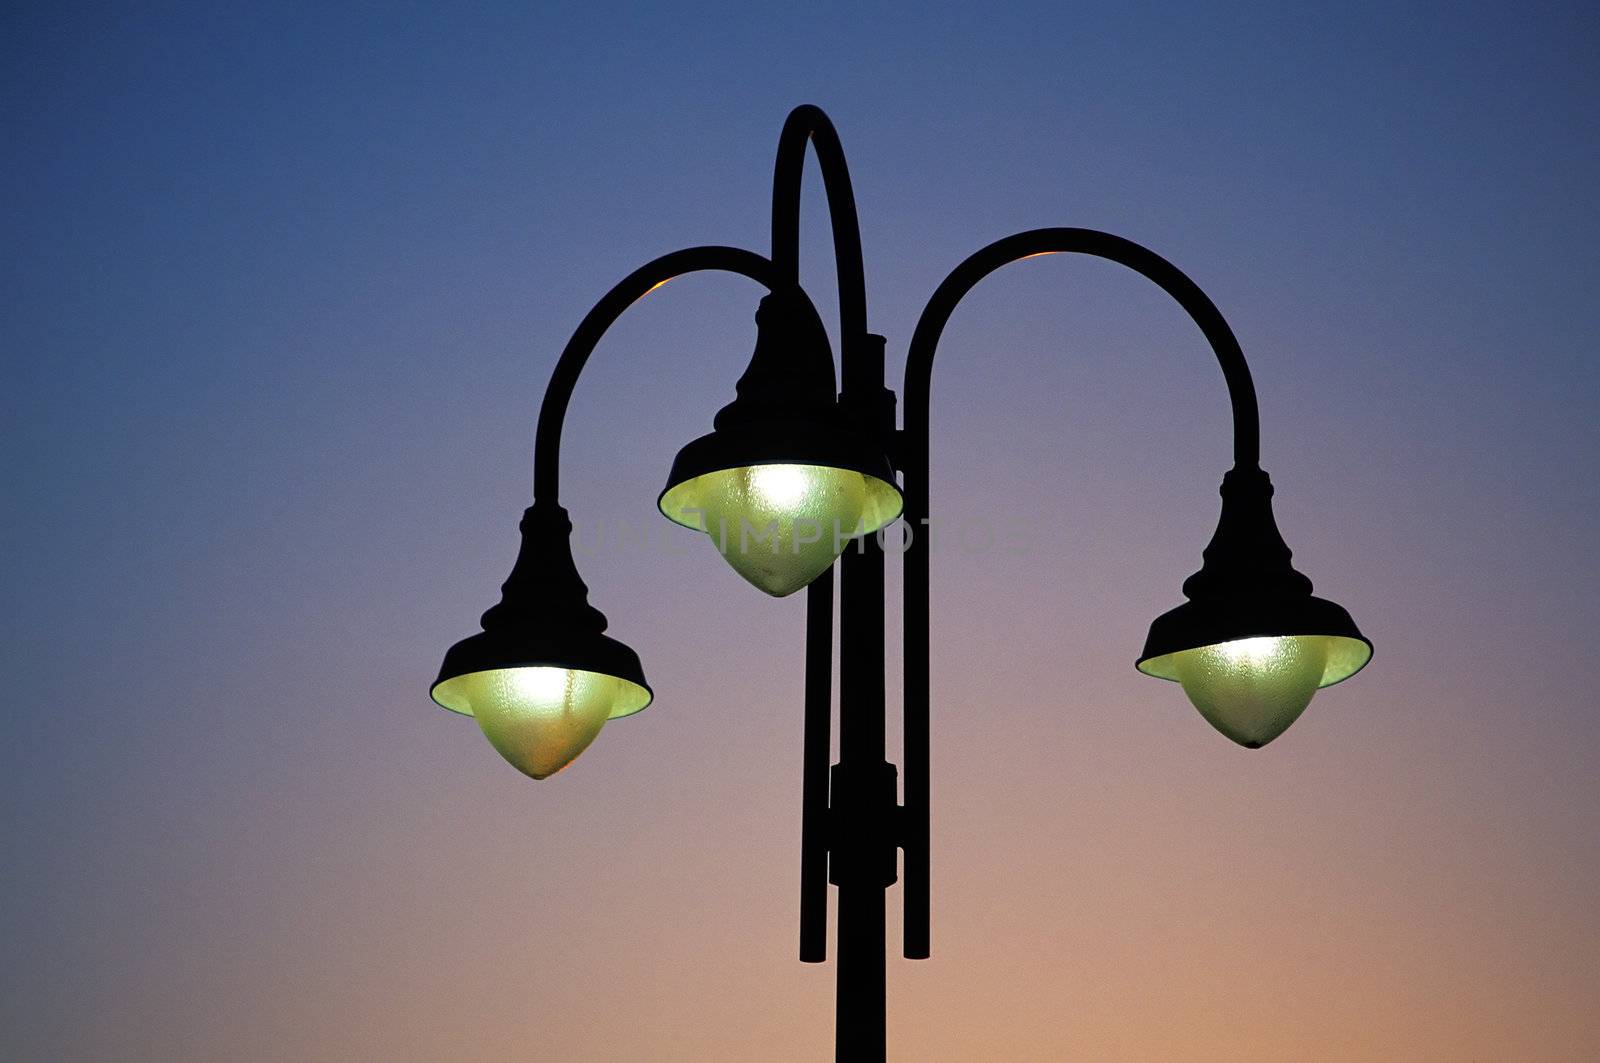 Three lights at dusk by Geoarts